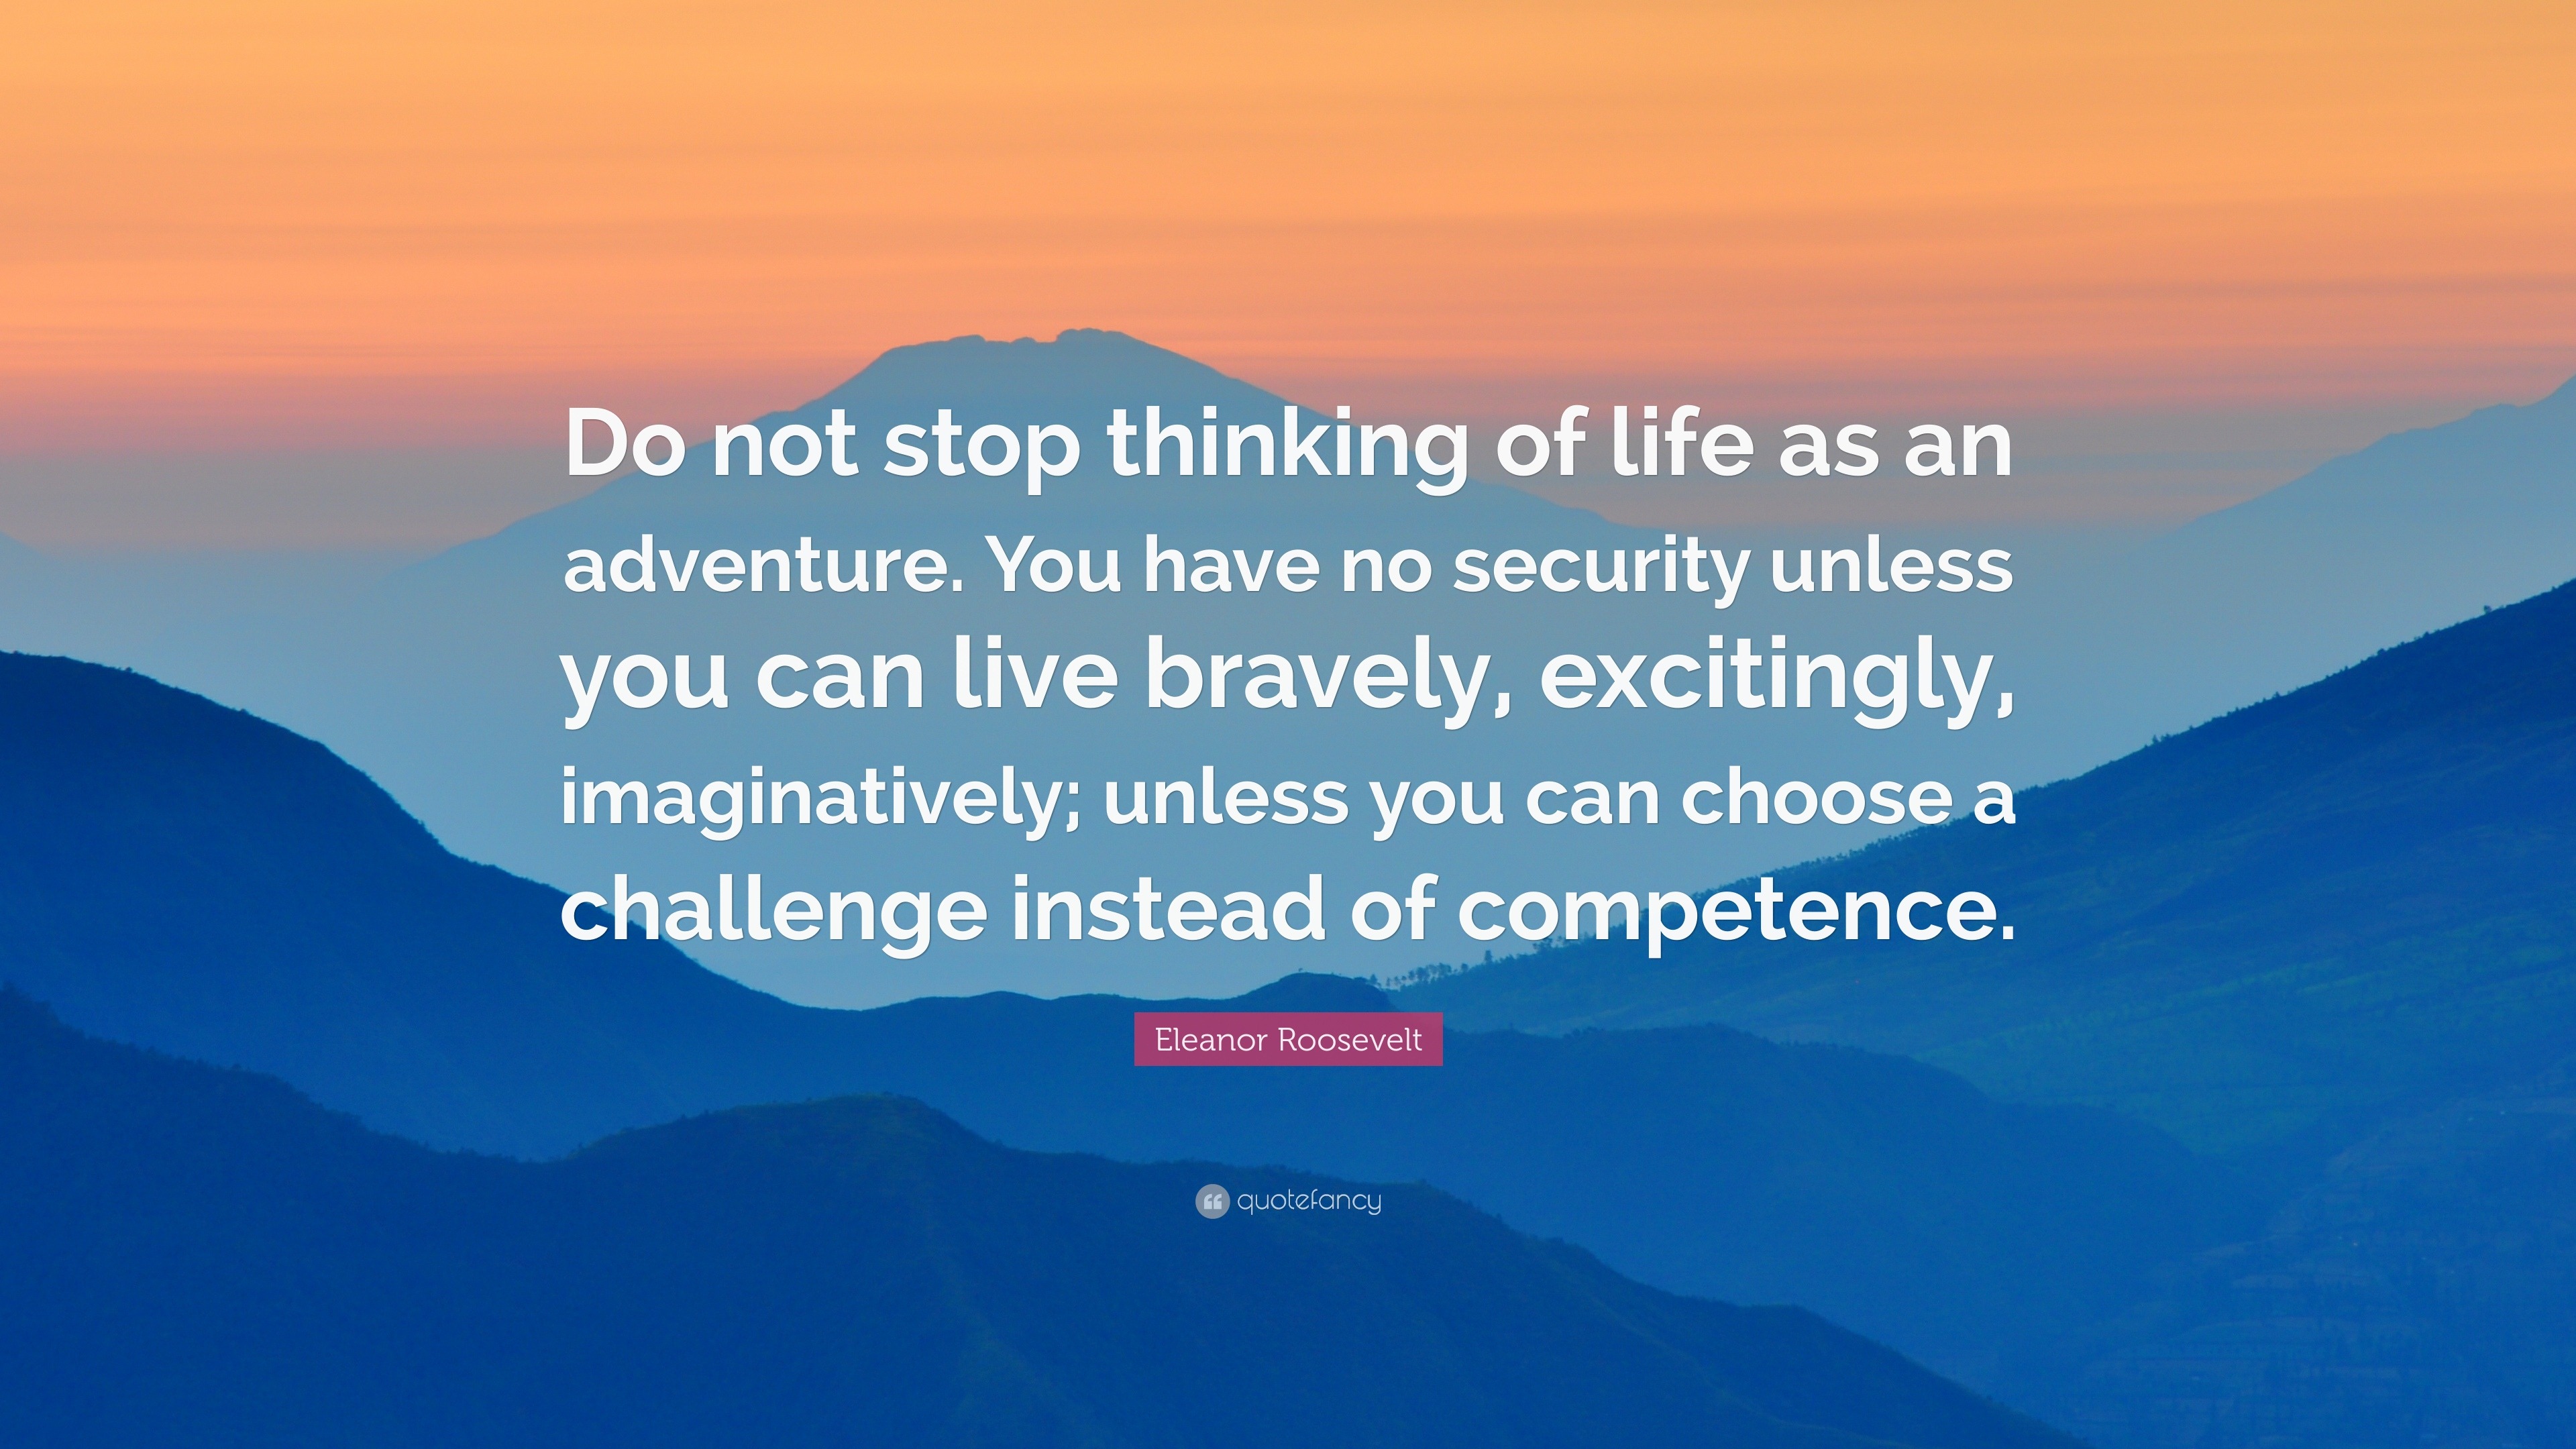 Eleanor Roosevelt Quote: “Do not stop thinking of life as an adventure ...